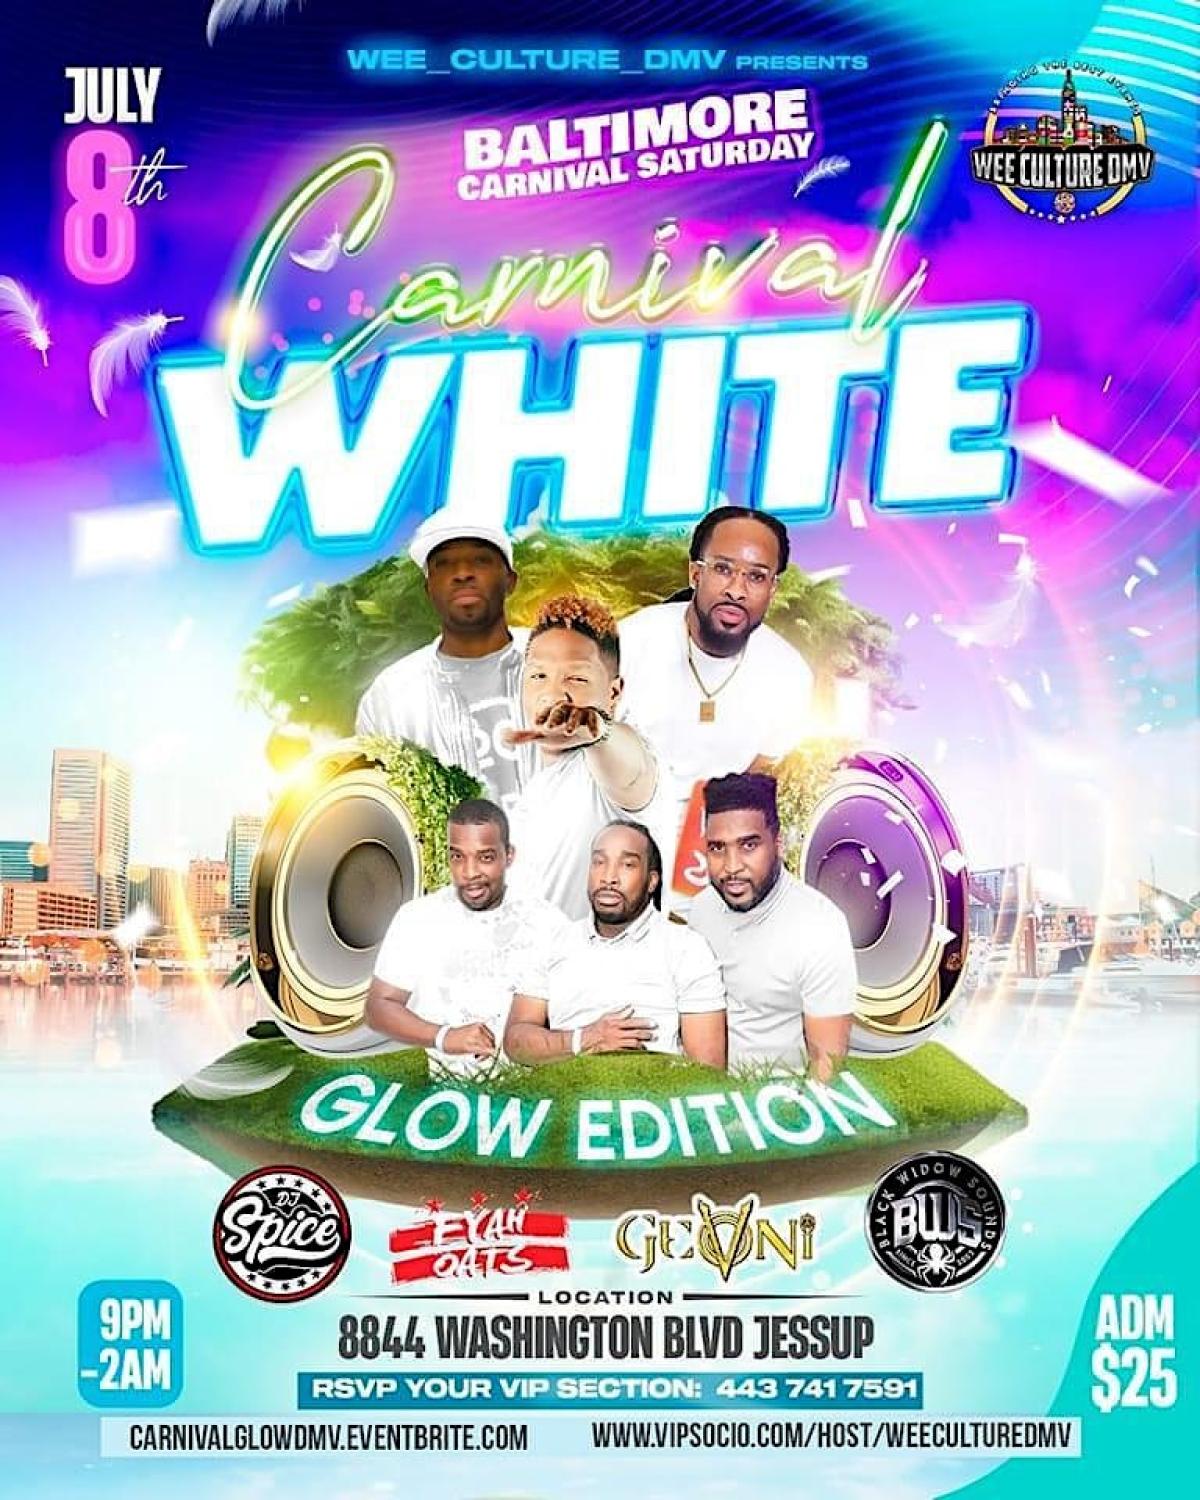 Carnival White Glow Edition flyer or graphic.